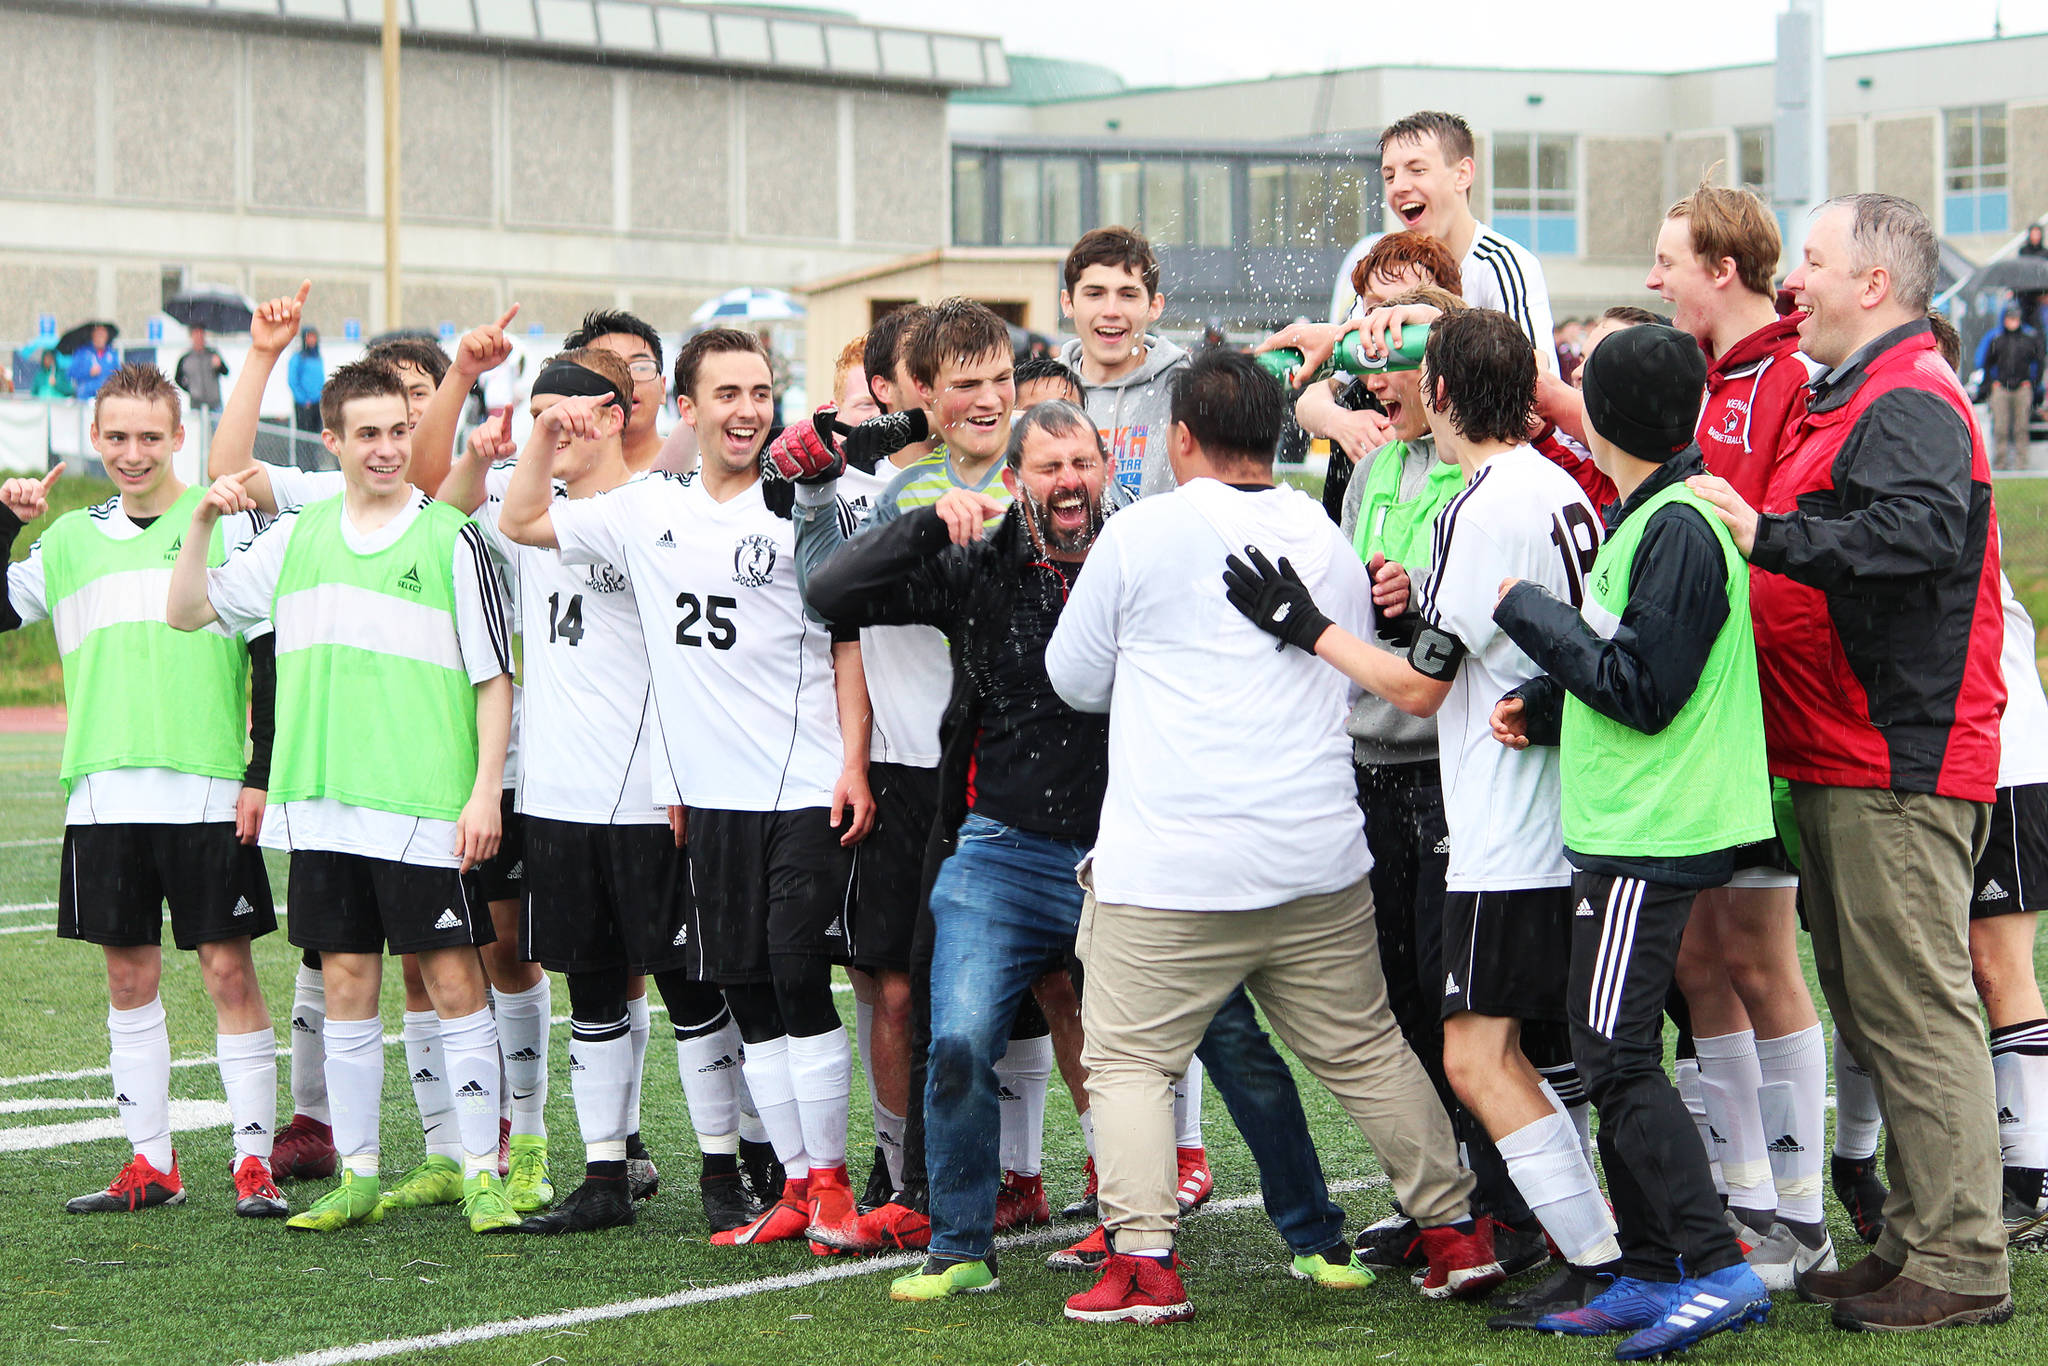 Members of the Kenai boys soccer team dump water on their head coach, Shane Lopez, in celebration of their win over Juneau on Saturday, May 25, 2019 to claim the Division II state soccer championship title. The game was played at Service High School in Anchorage, Alaska. (Photo by Megan Pacer/Homer News)